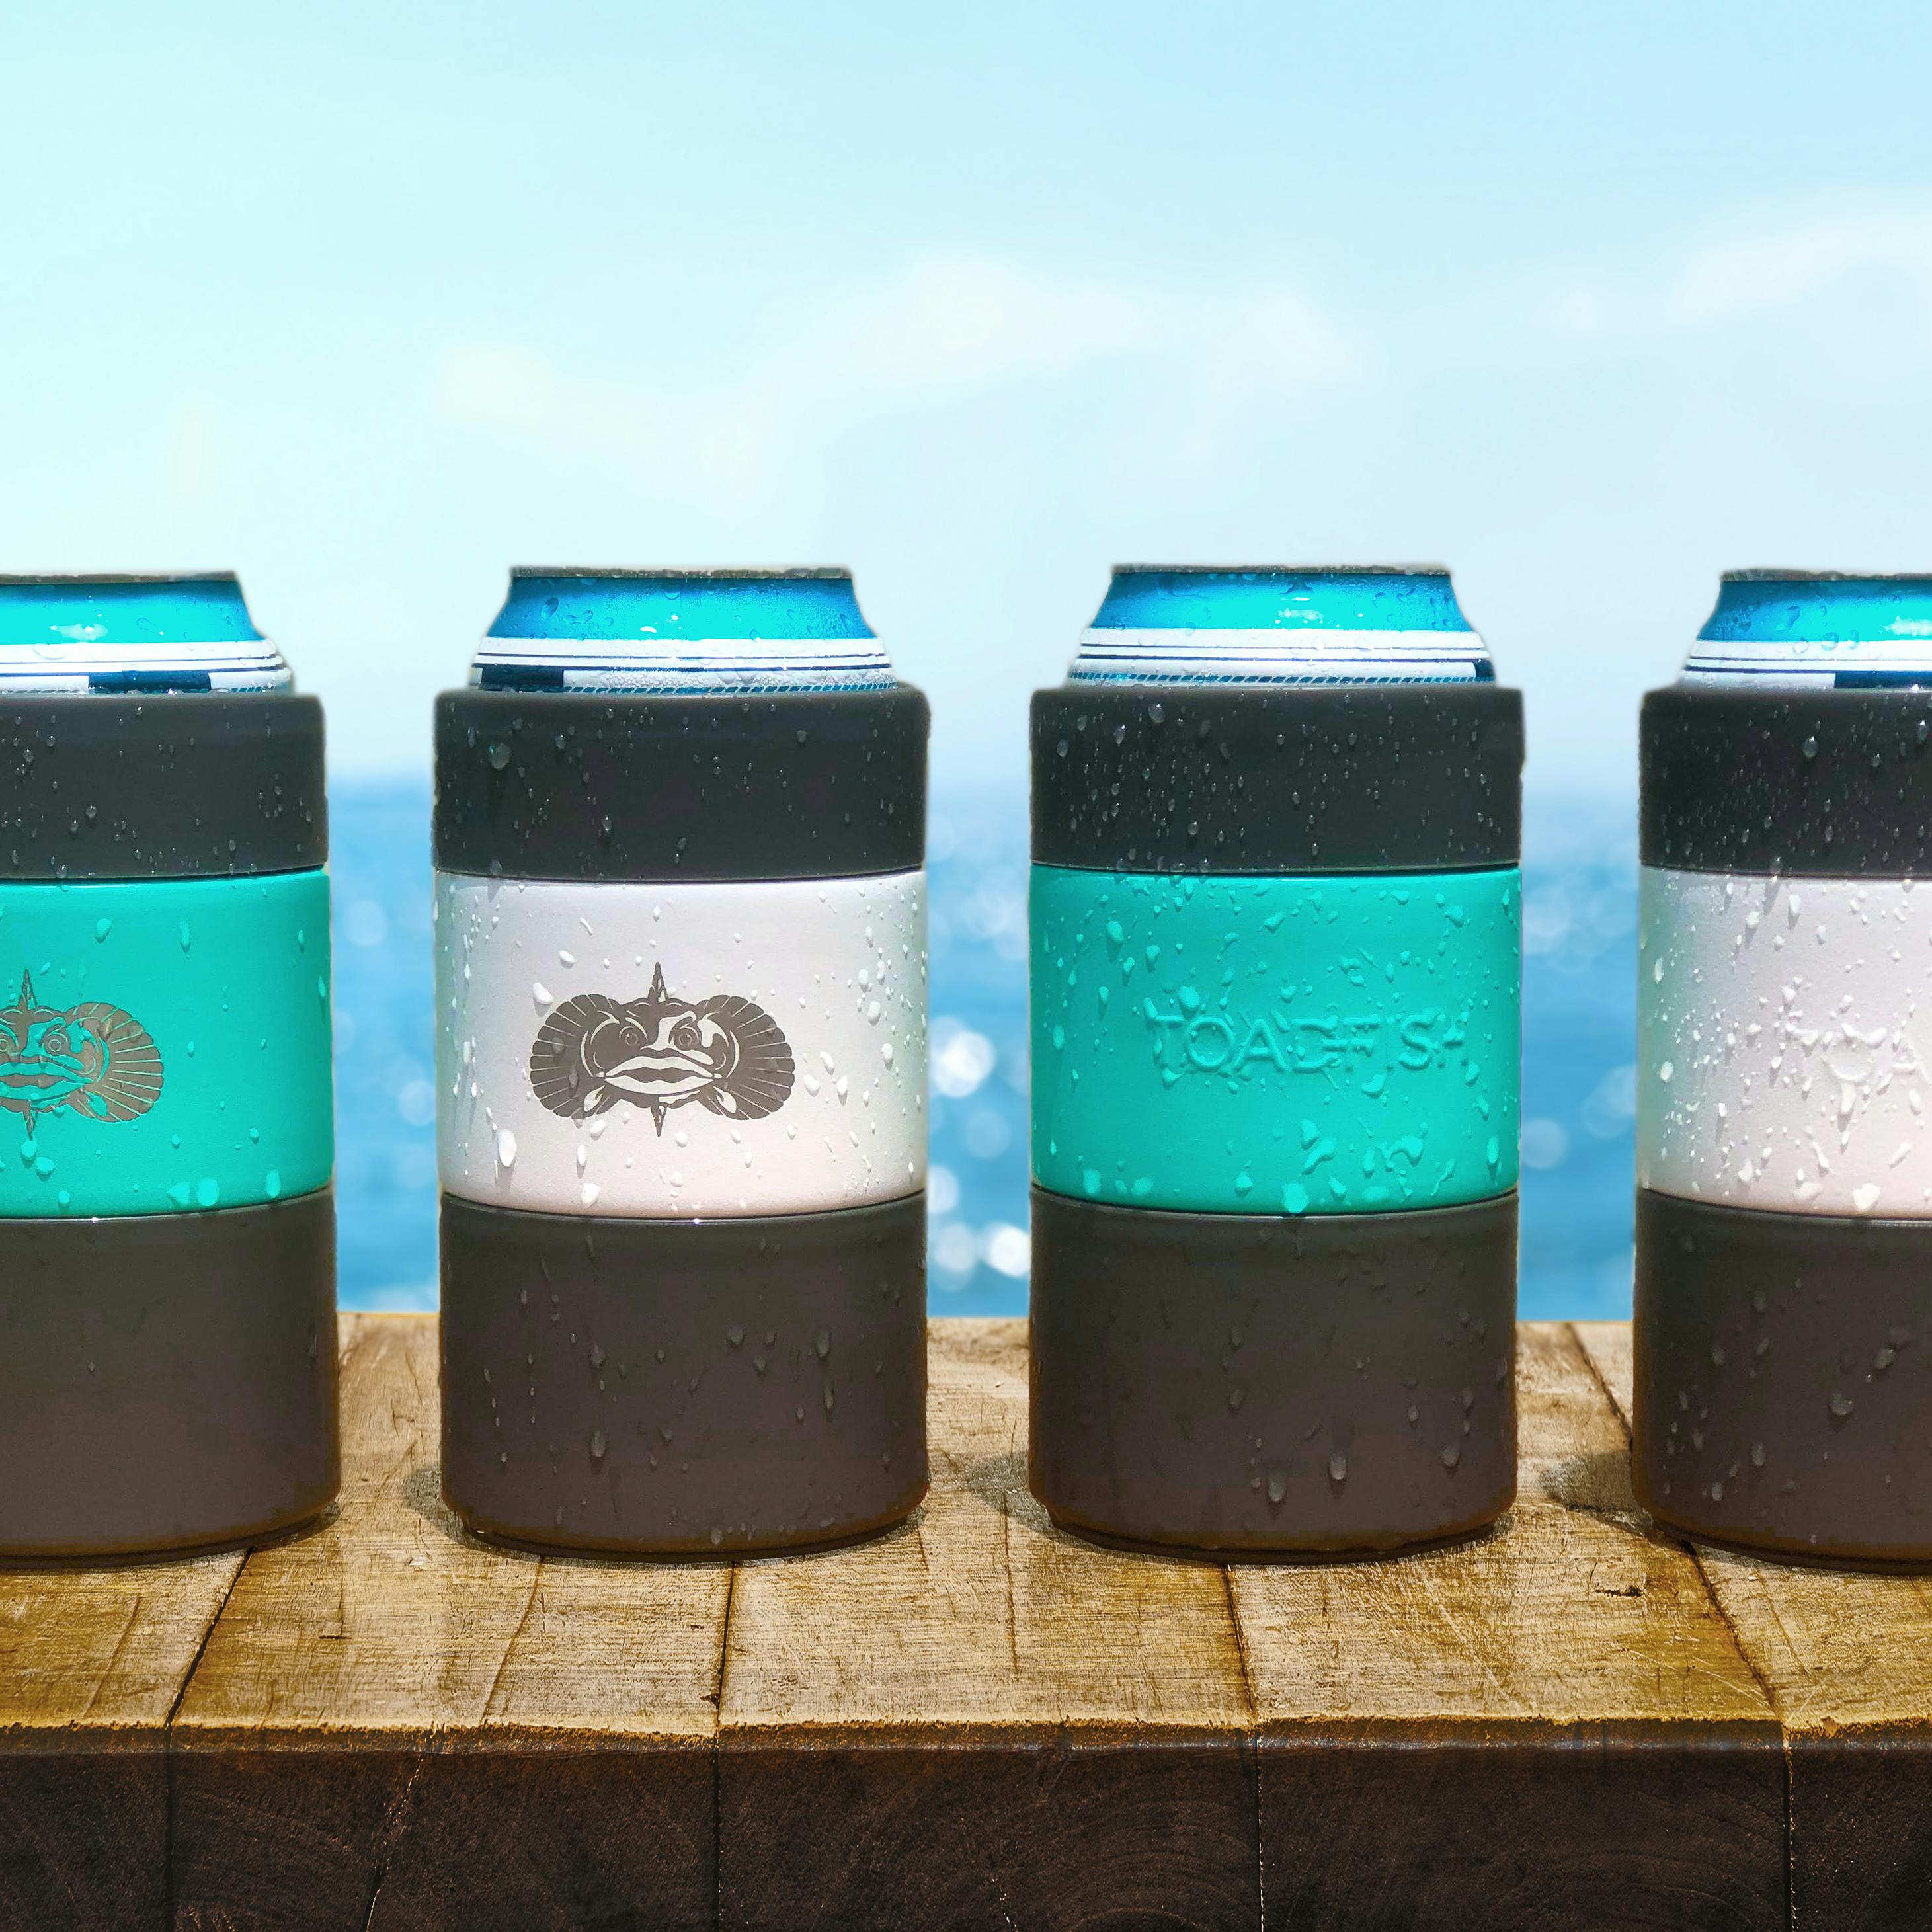 https://huckberry.imgix.net/spree/products/597131/original/JrIS5ZBJ0R_toadfish-outfitters_the_non-tipping_can_cooler_gifts_5_original.jpg?auto=format%2C%20compress&crop=top&fit=clip&cs=tinysrgb&ixlib=react-9.5.2